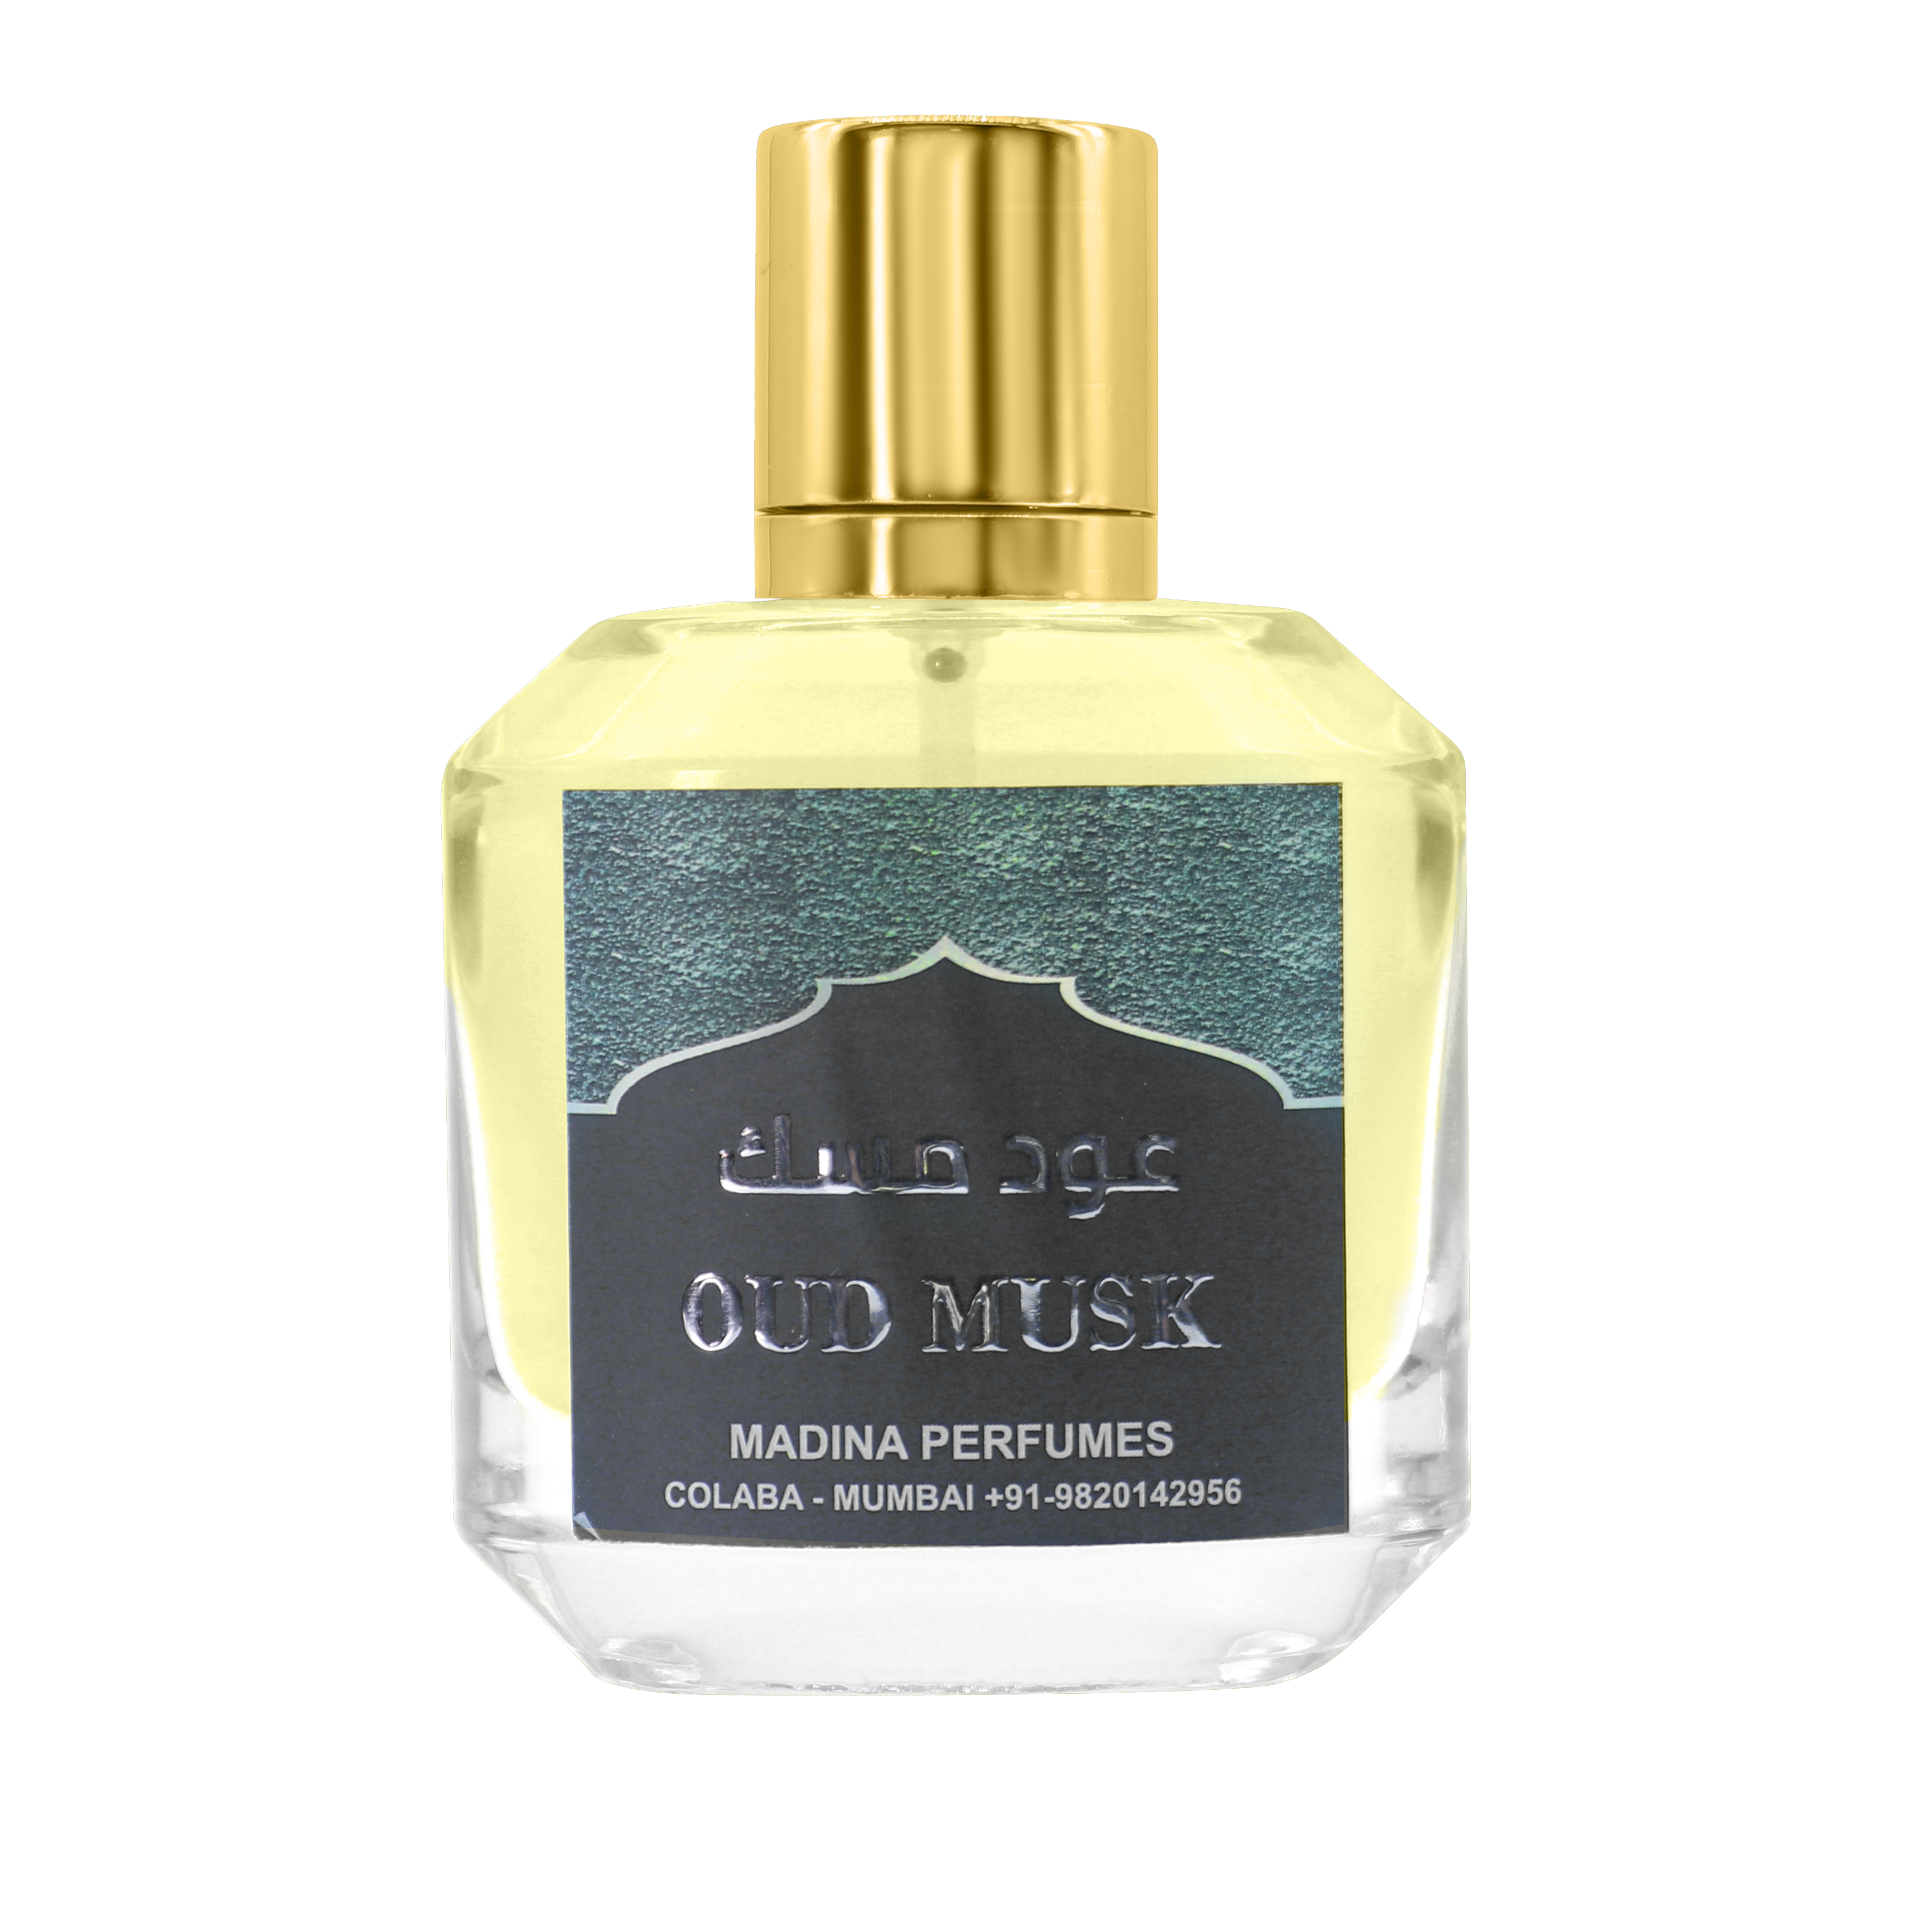 oudh musk.png (4.28 MB)